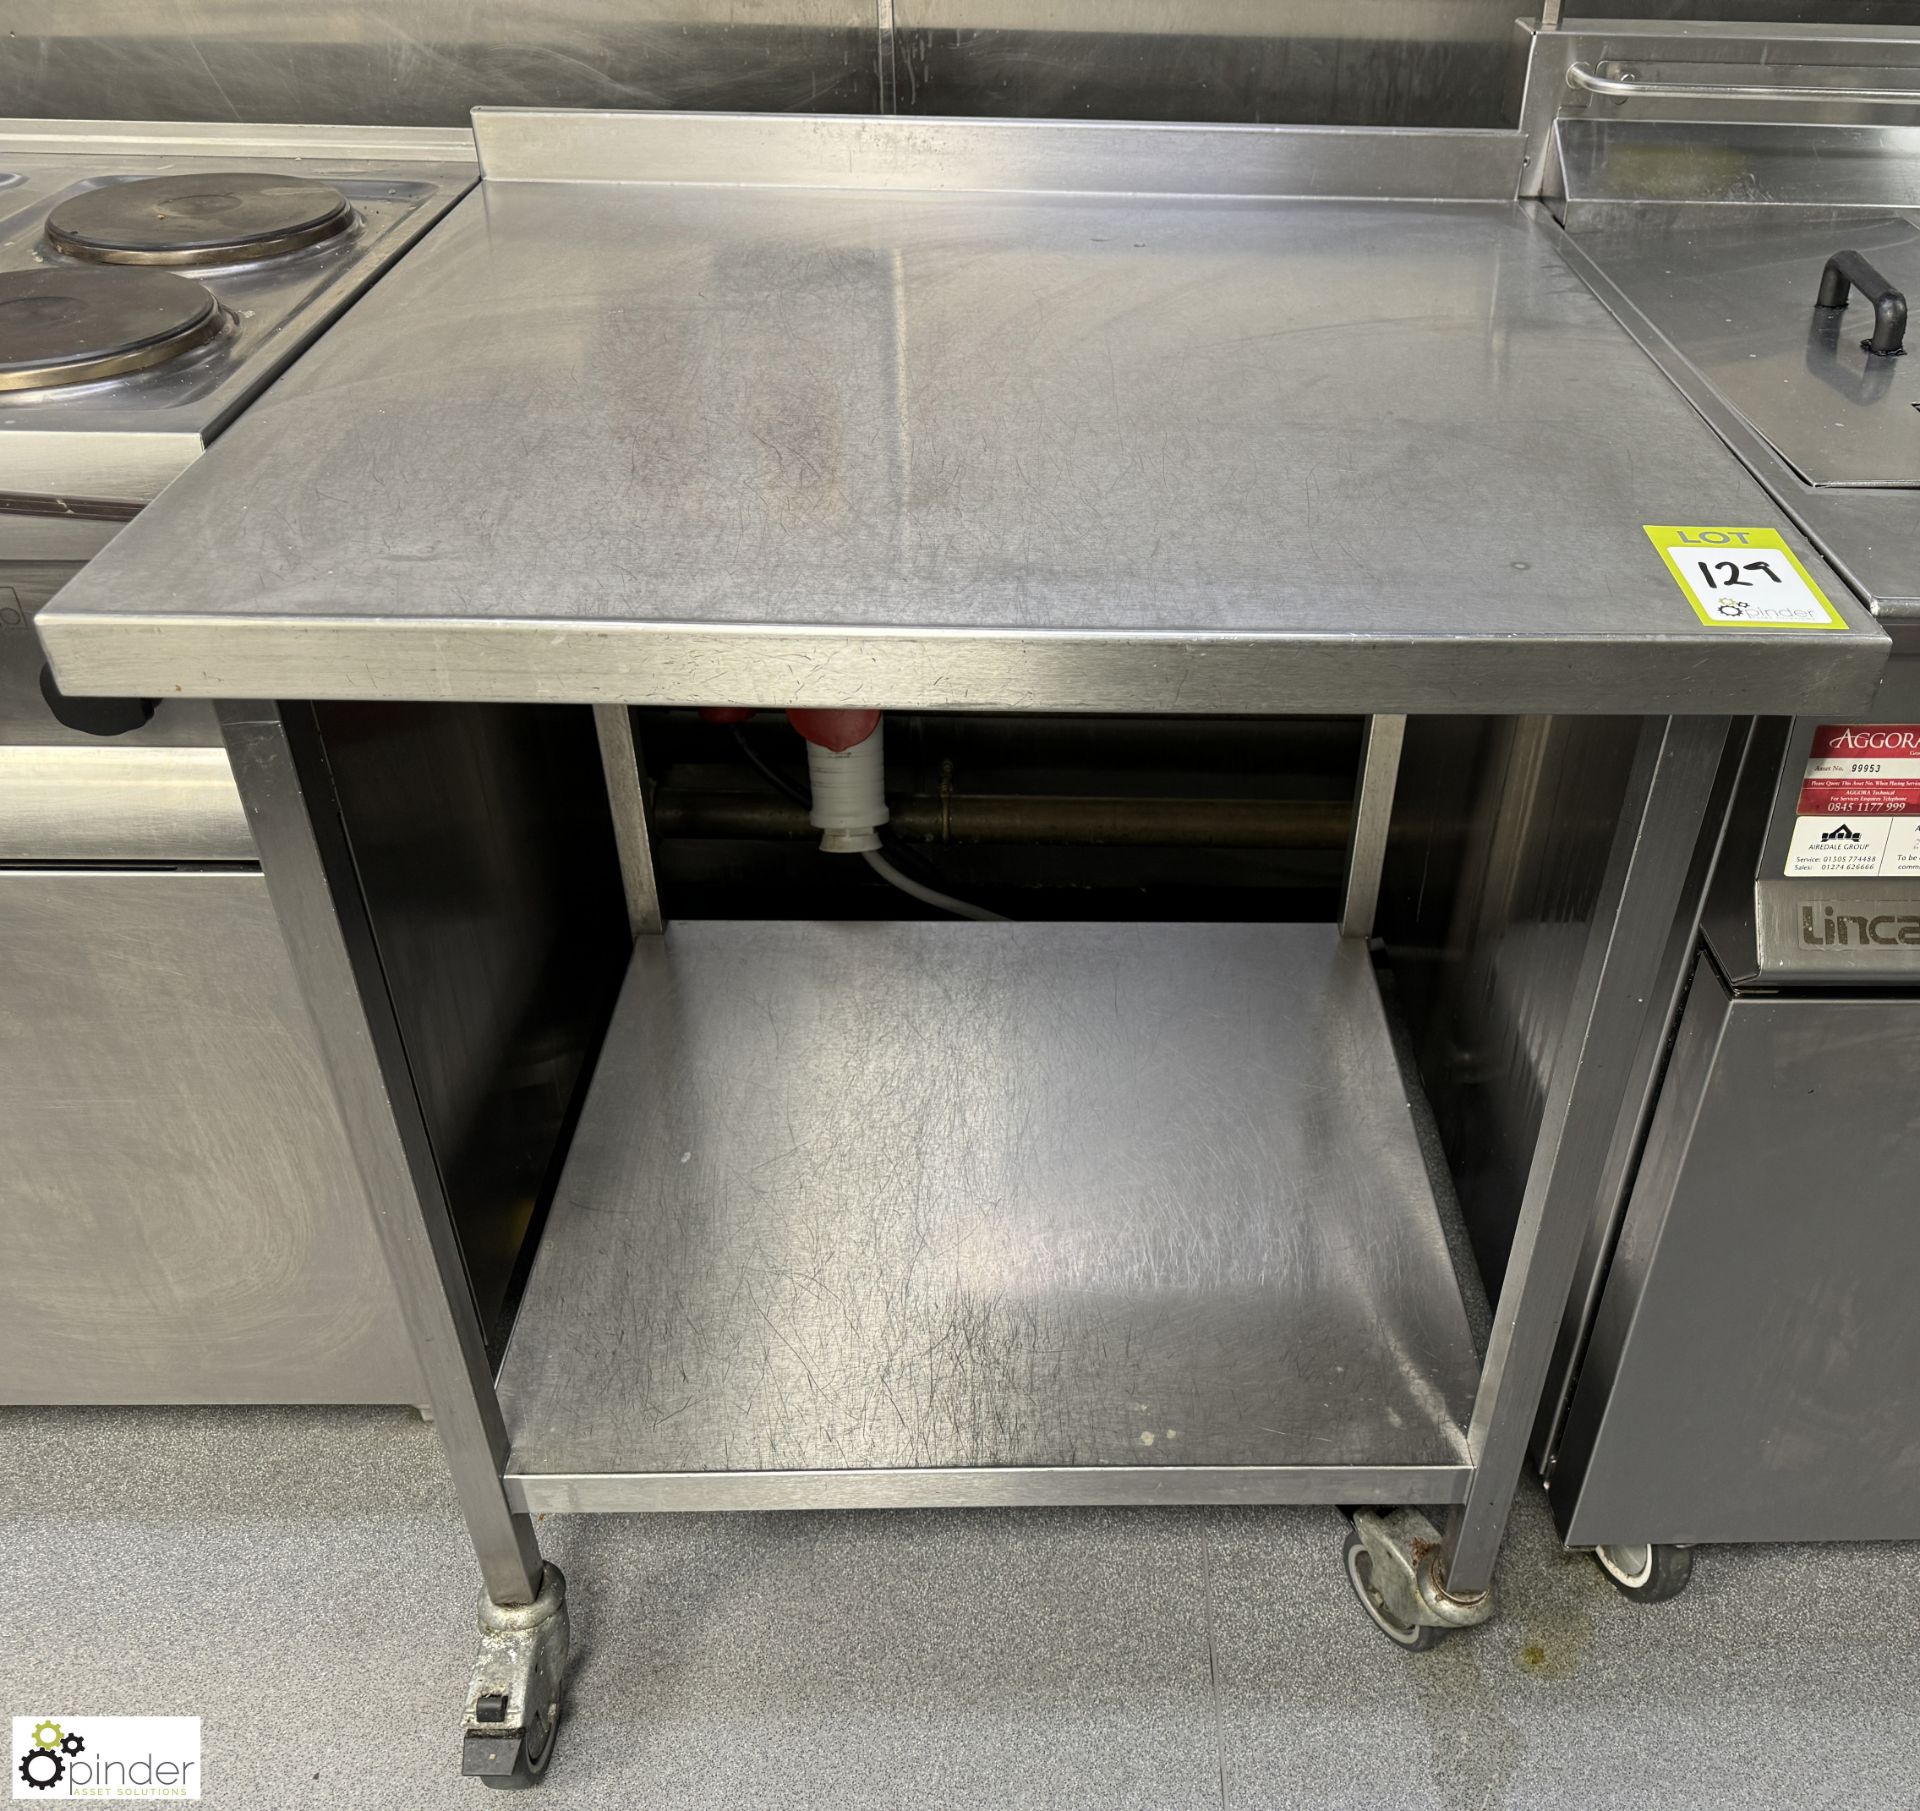 Stainless steel mobile Preparation Table, 800mm x 750mm x 900mm, with under shelf (location in